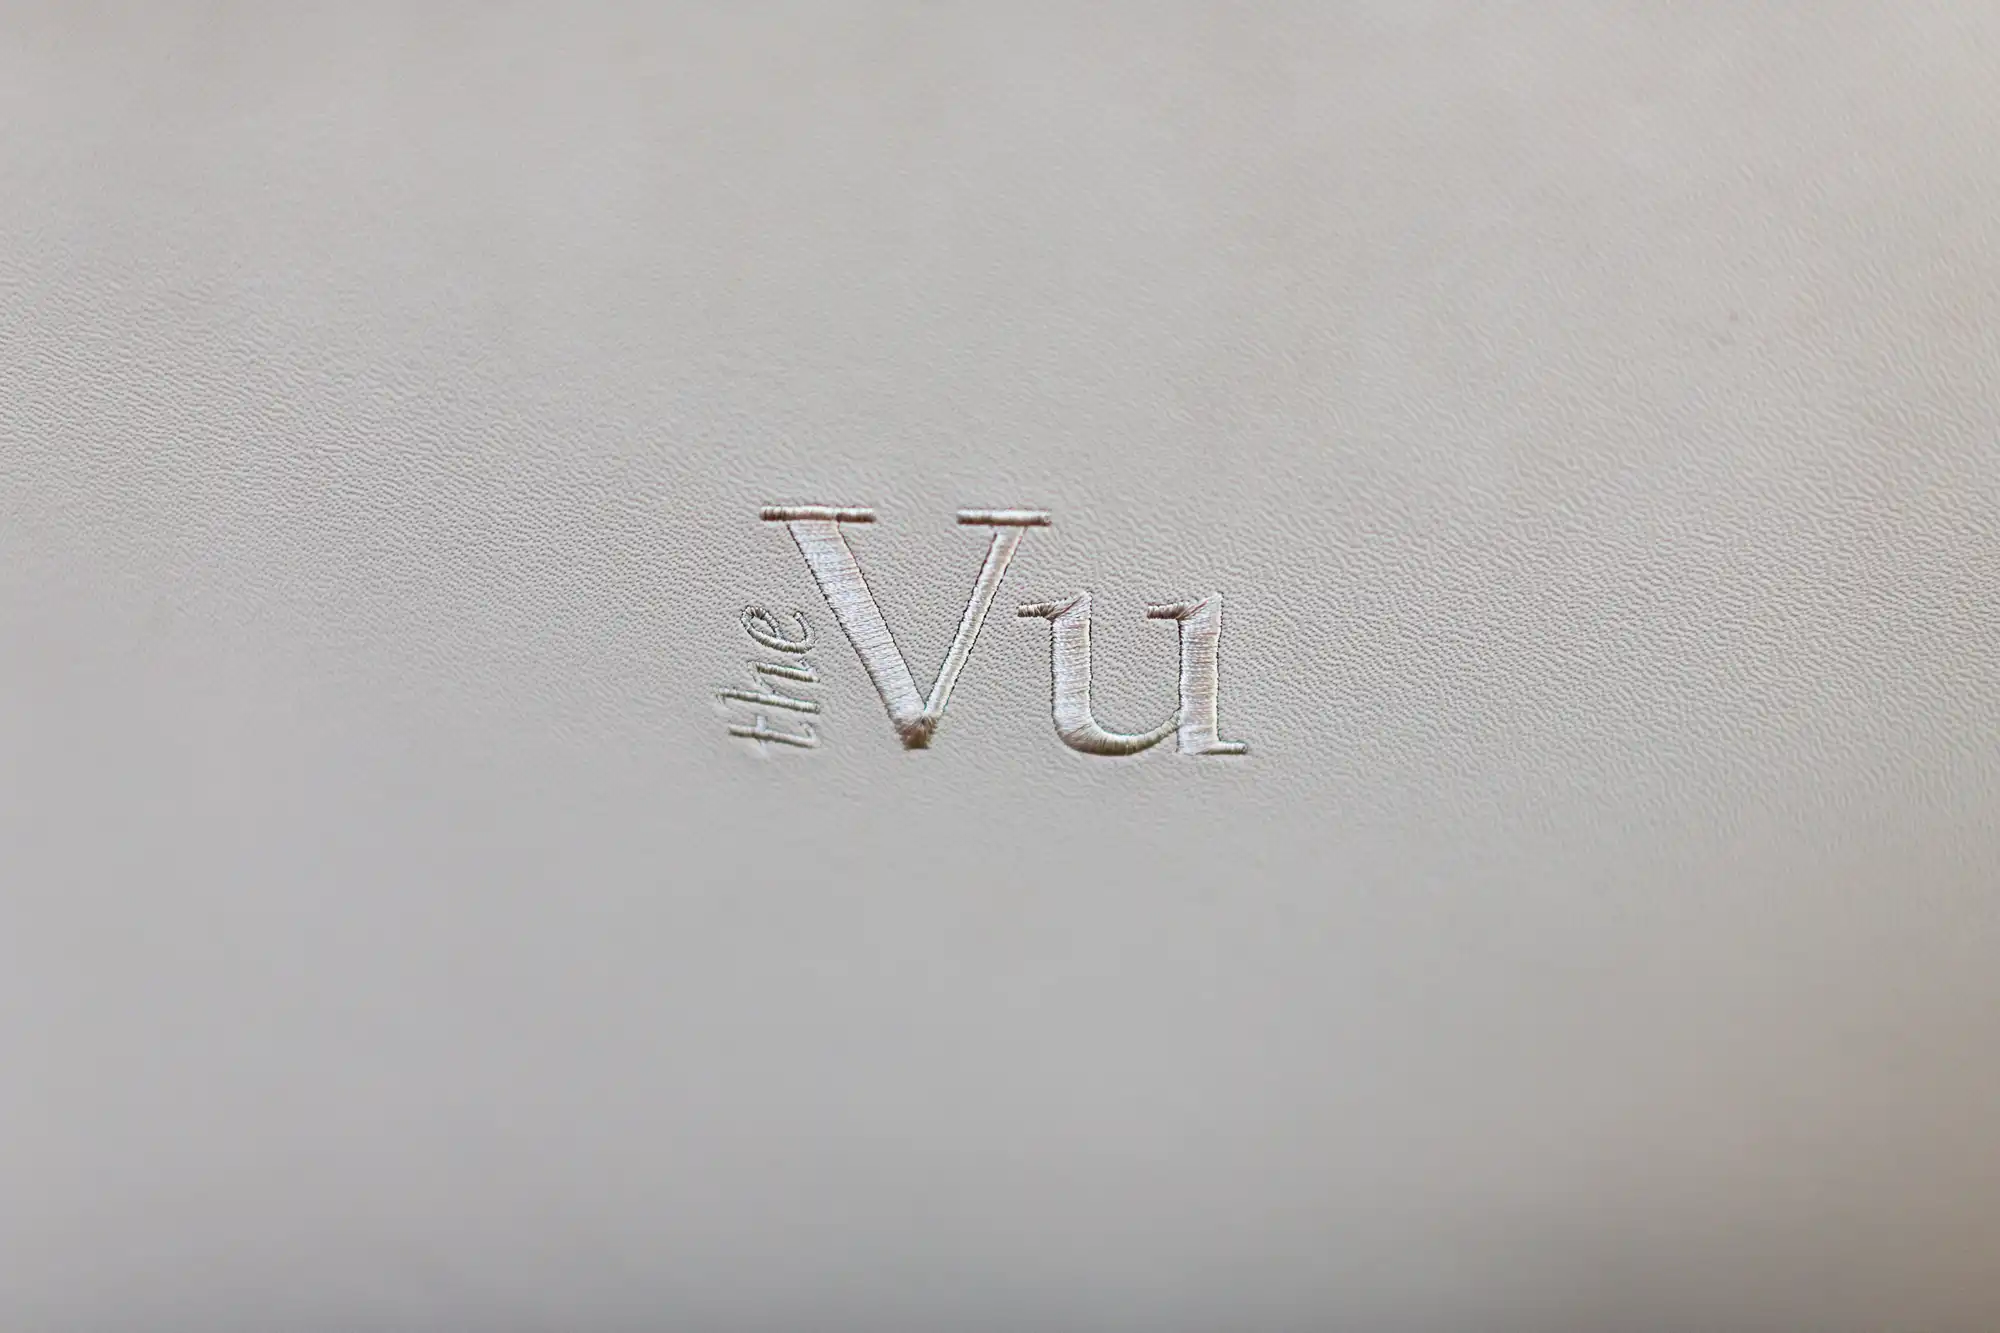 Embossed text "the vu" on a textured white background.